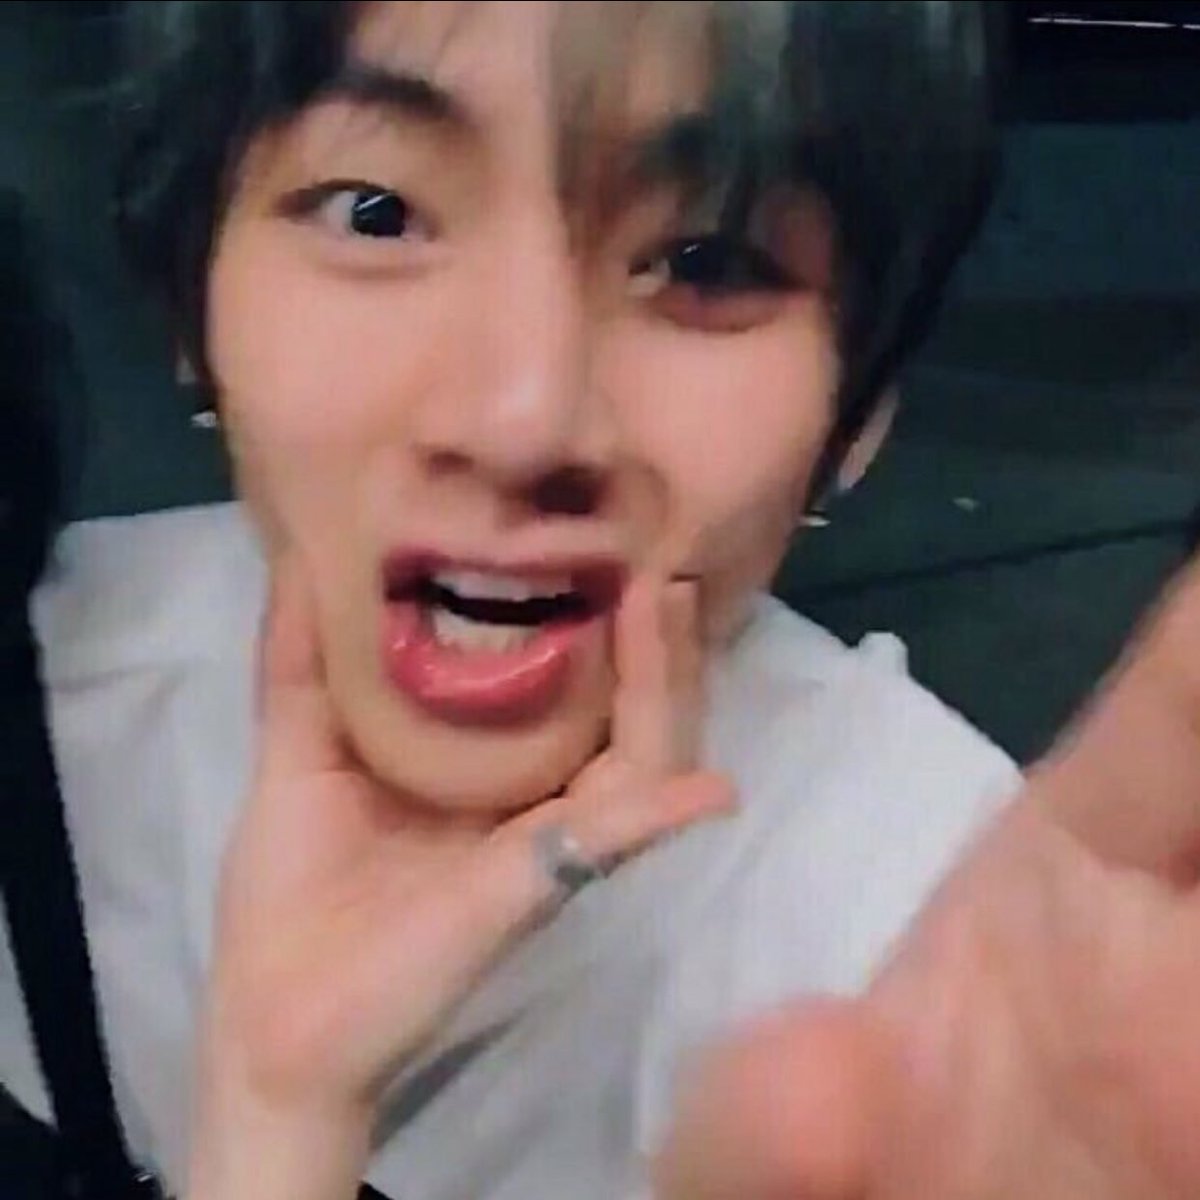 ꒰ day 15 of 365 ꒱taehyung! i noticed you played games with armys earlier today, sounded like so much fun :( i really hope you’re enjoying your break, you deserve to sit back and relax. i love you so much (^з^)